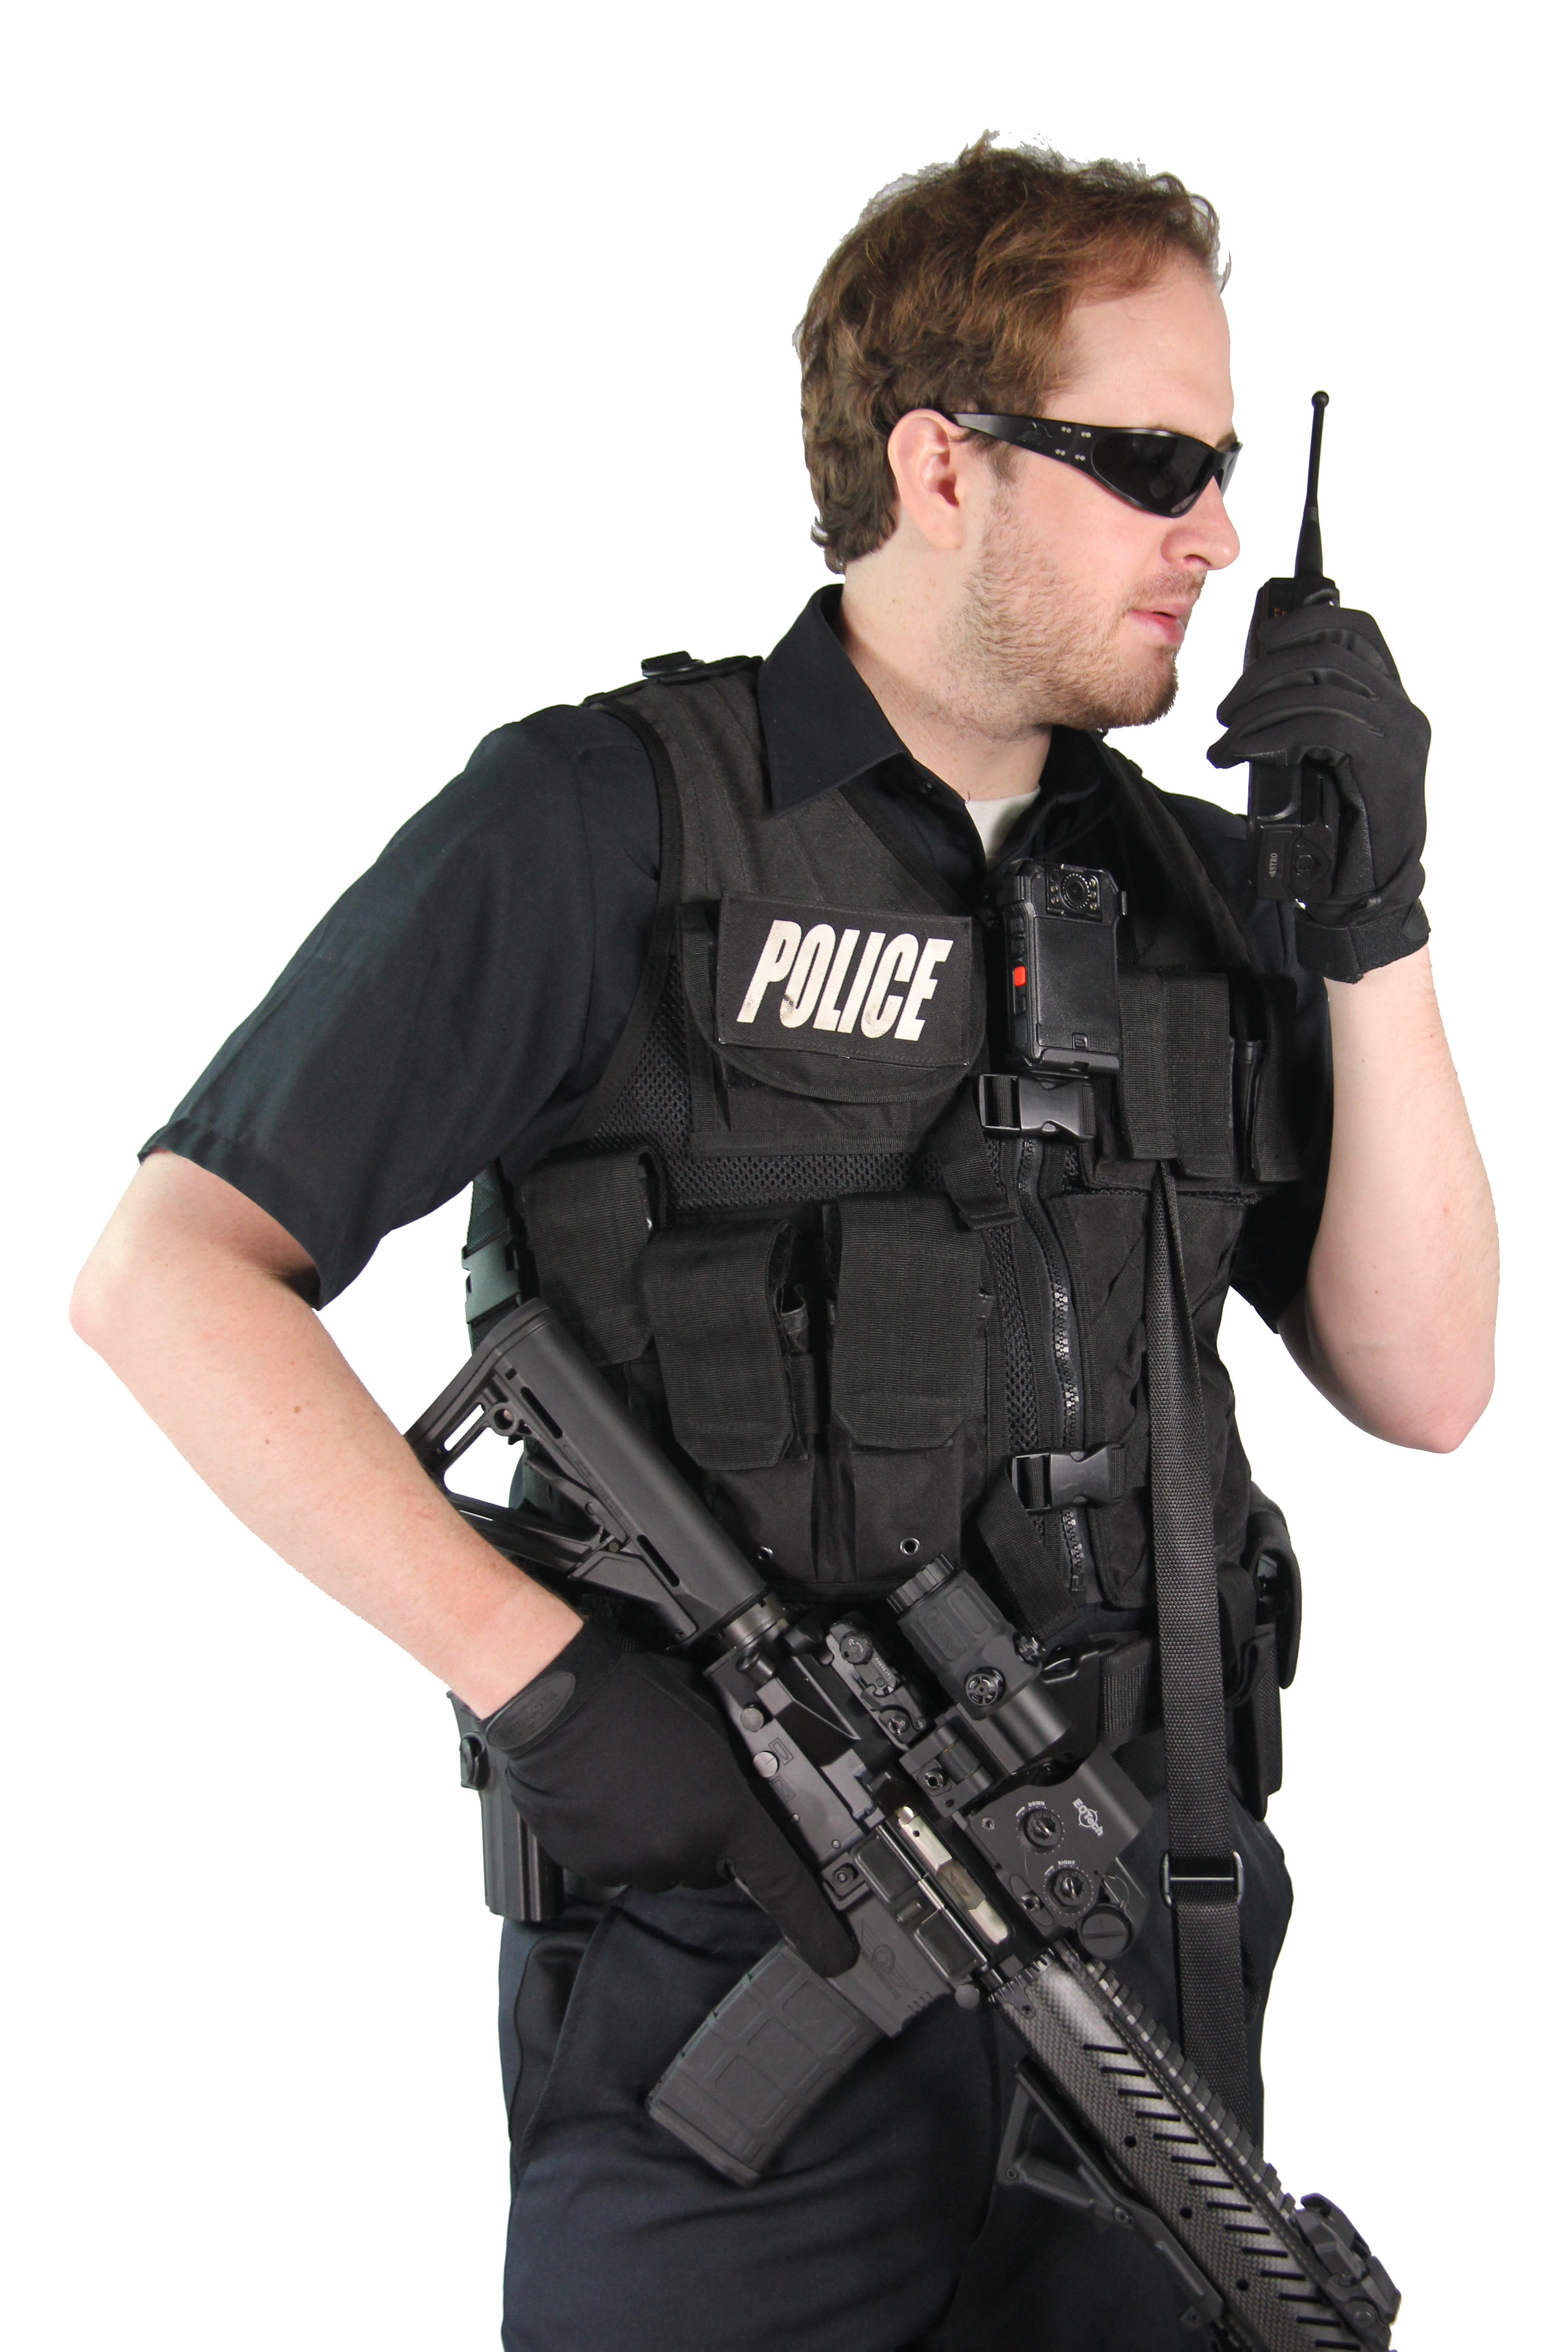 police officer using the wolfcom x1 police body camera